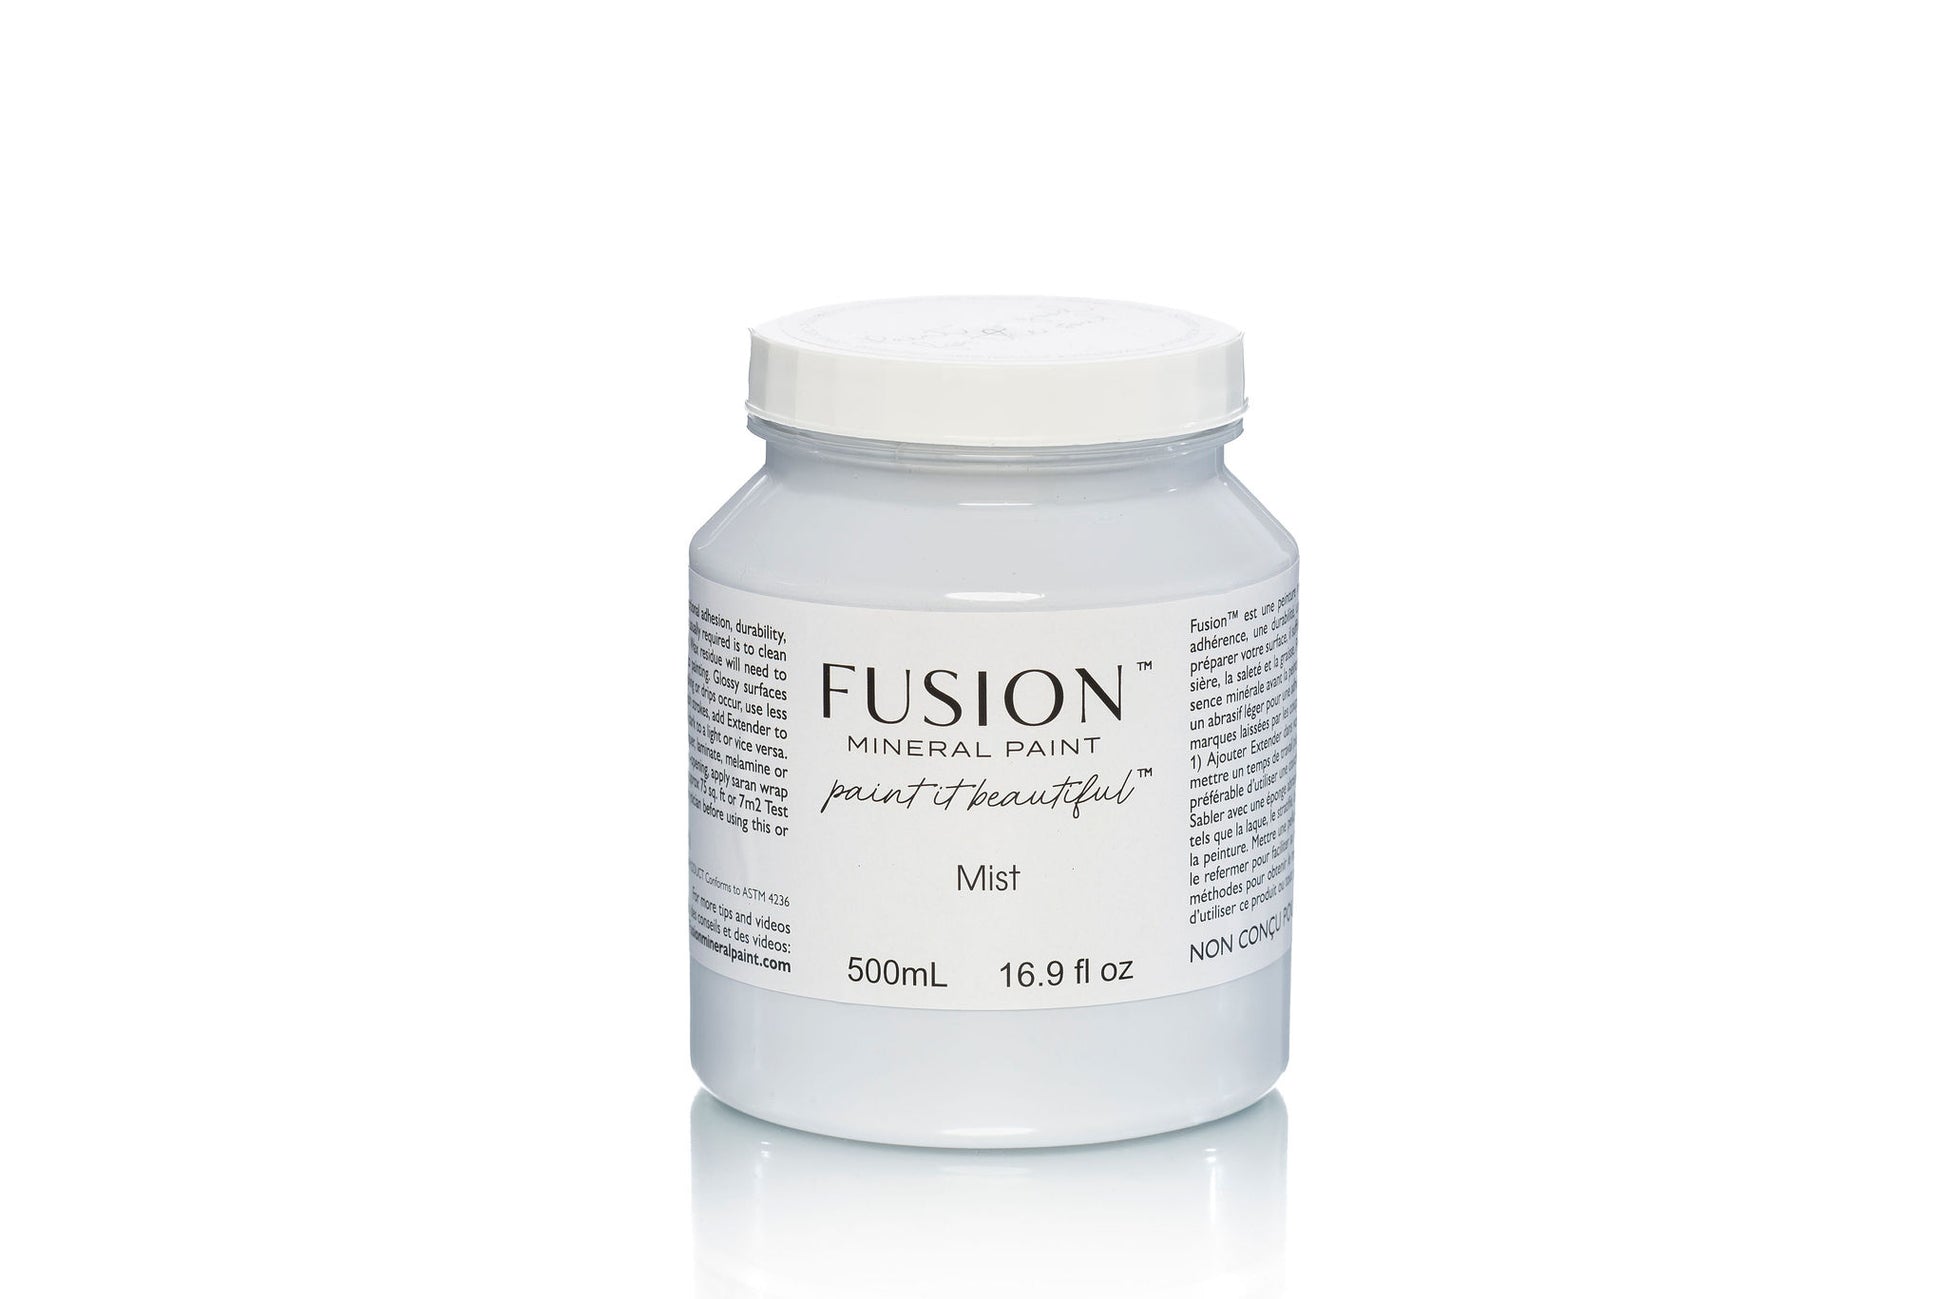 Fusion Mineral Paint in Eucalyptus - Painted